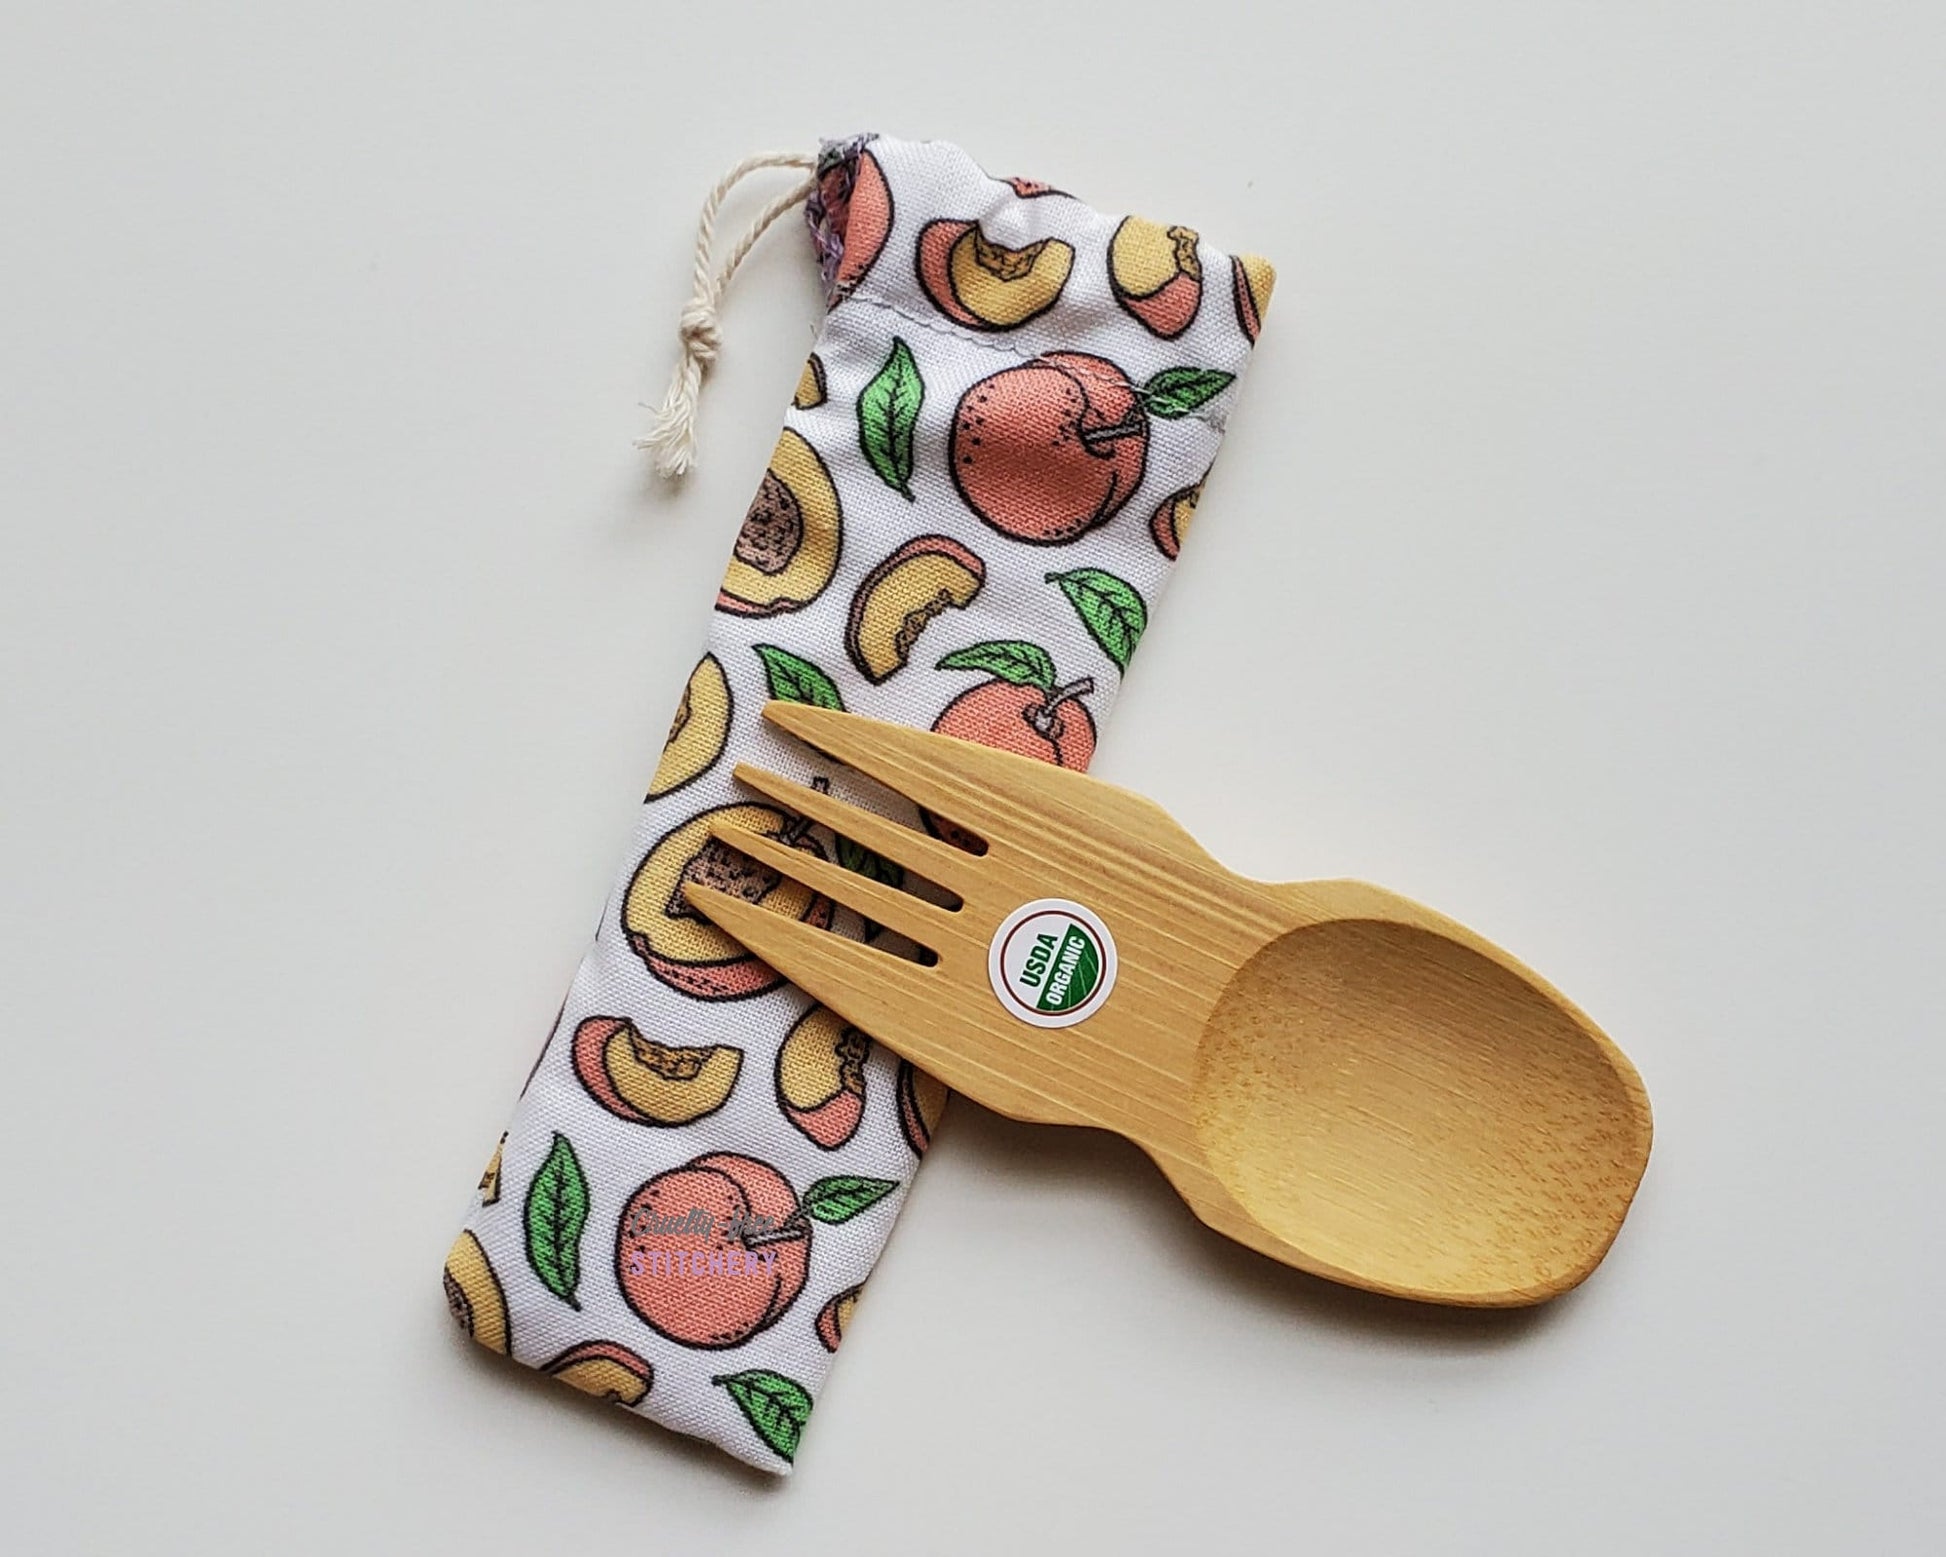 Peaches print reusable spork pouch. The pouch is sitting diagonally with the spork partially on top pointing the other way. The fork end of the spork is pointing to the left.